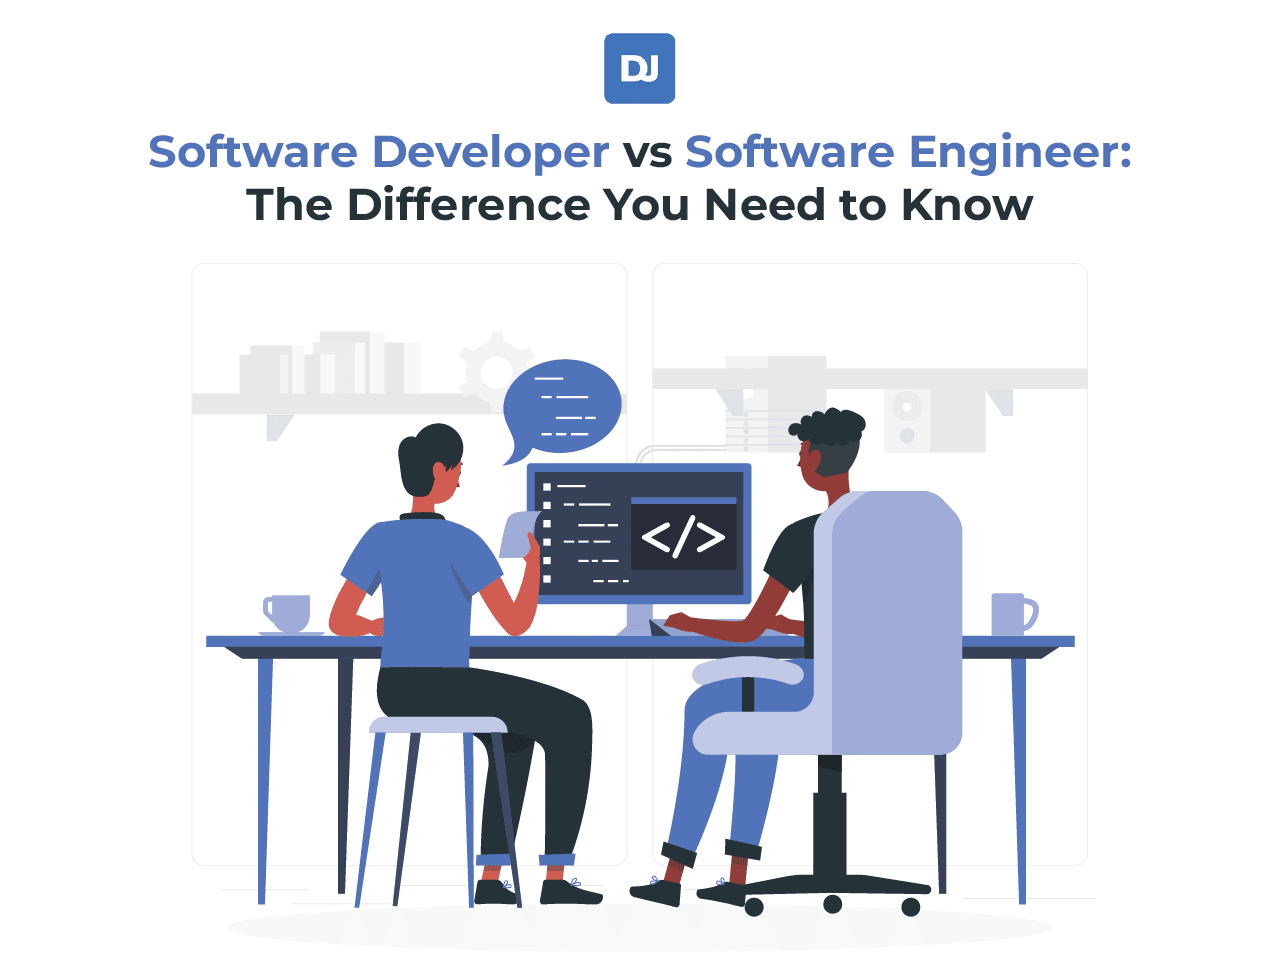 Software Developer vs Software Engineer: The Difference You Need to Know